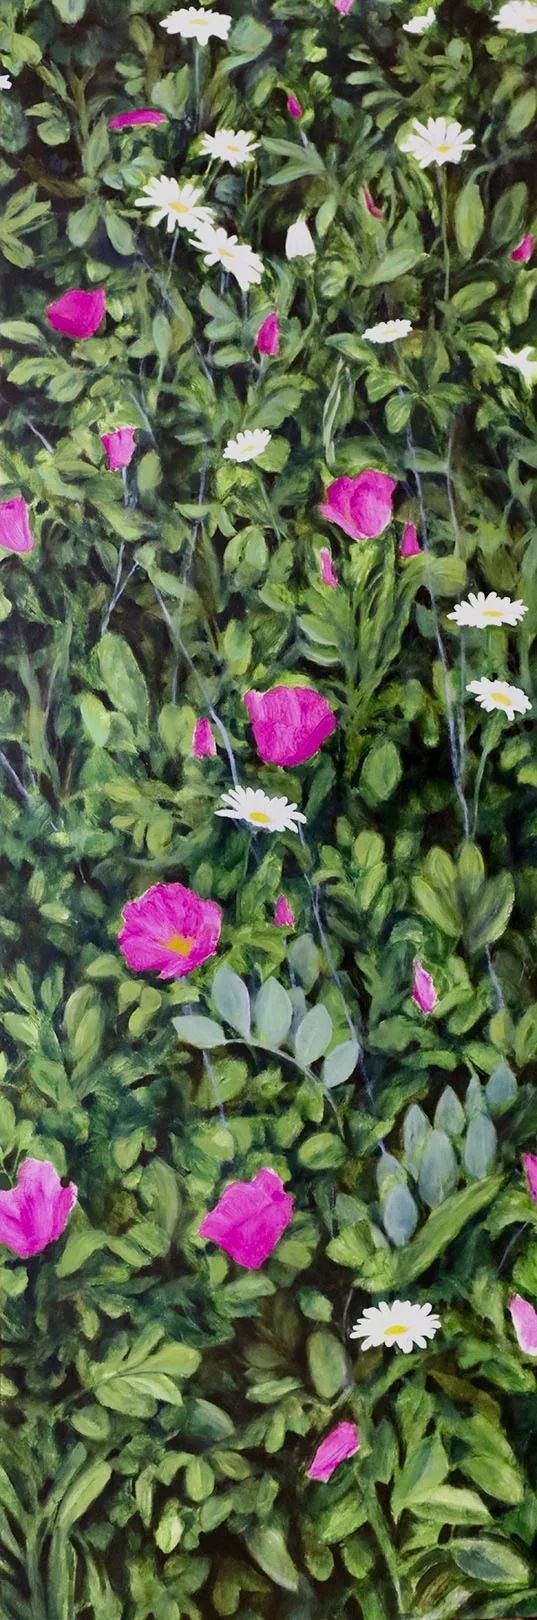 Vertical painting of beach roses and daisies at twilight, the pink and white flowers and foliage